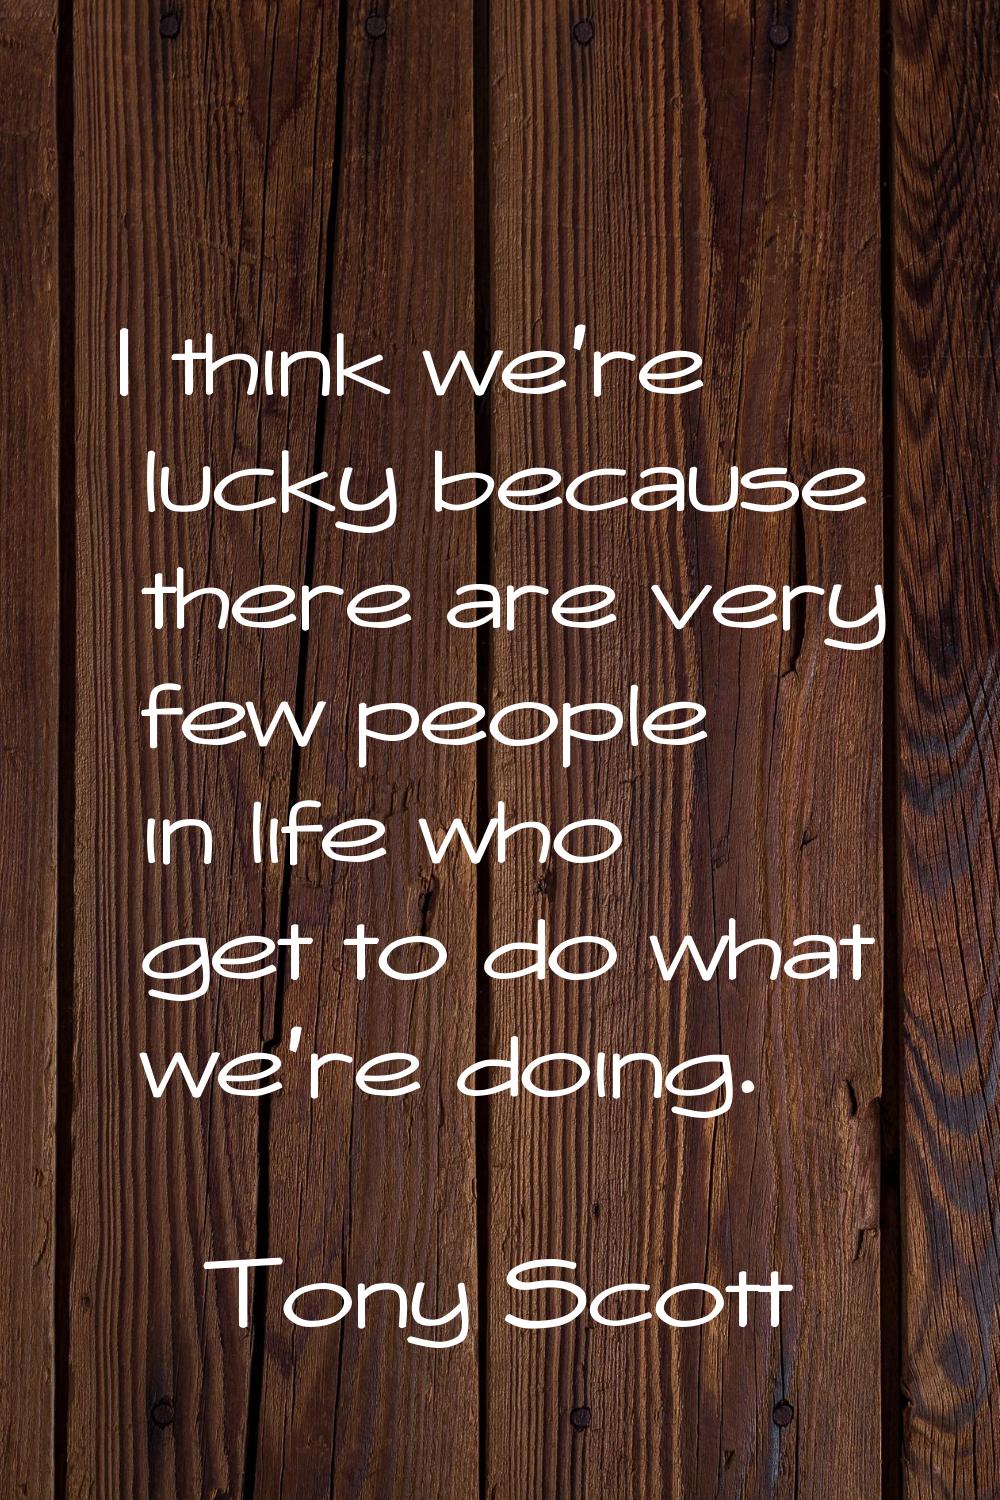 I think we're lucky because there are very few people in life who get to do what we're doing.